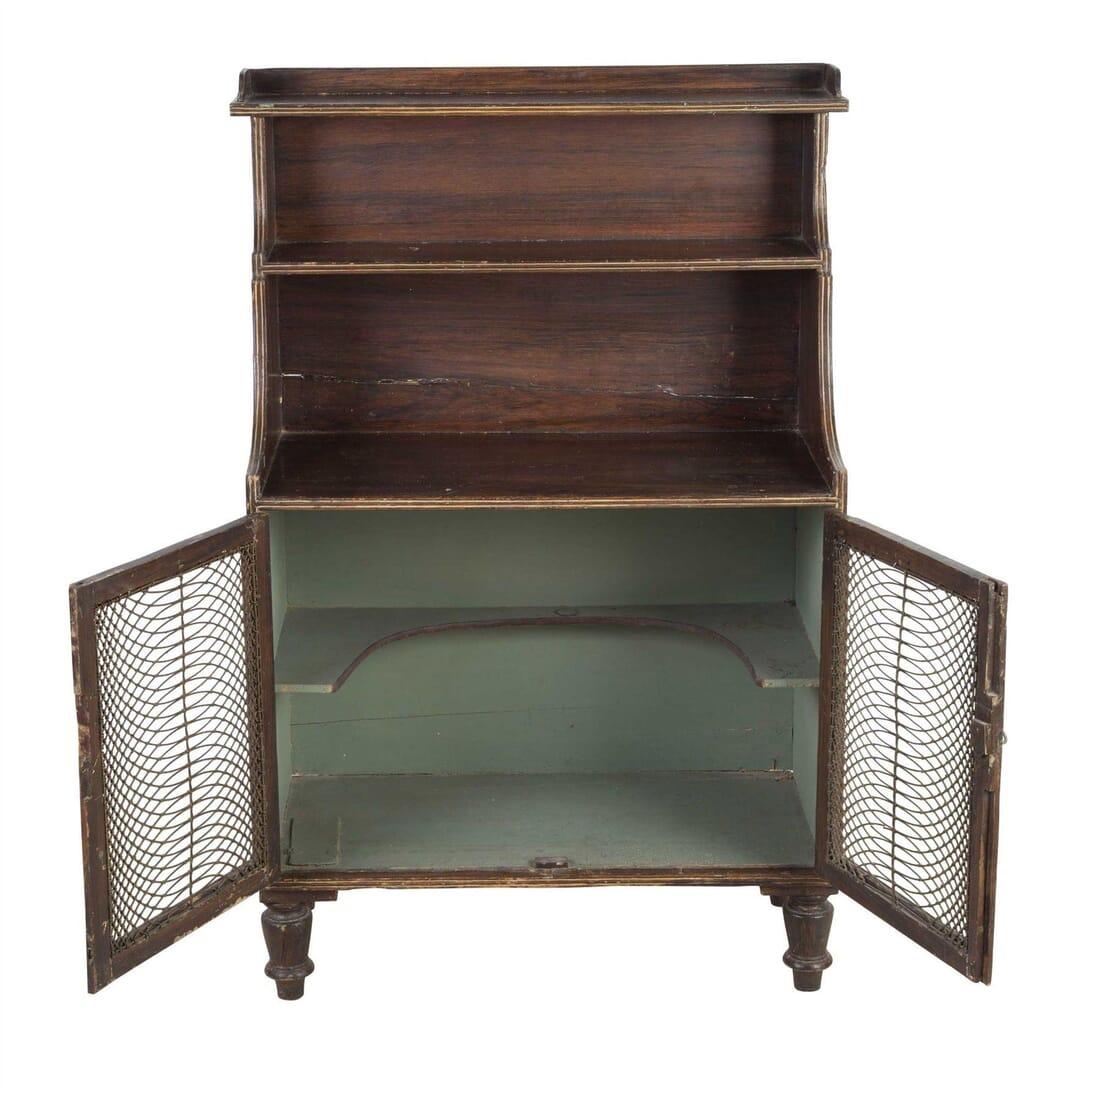 A Regency faux rosewood decorated waterfall bookcase with intricate wire trellis work on the panelled doors. English, circa 1820.

During the first 30 years of the 19th Century, the use of low cabinets with display shelves became very popular